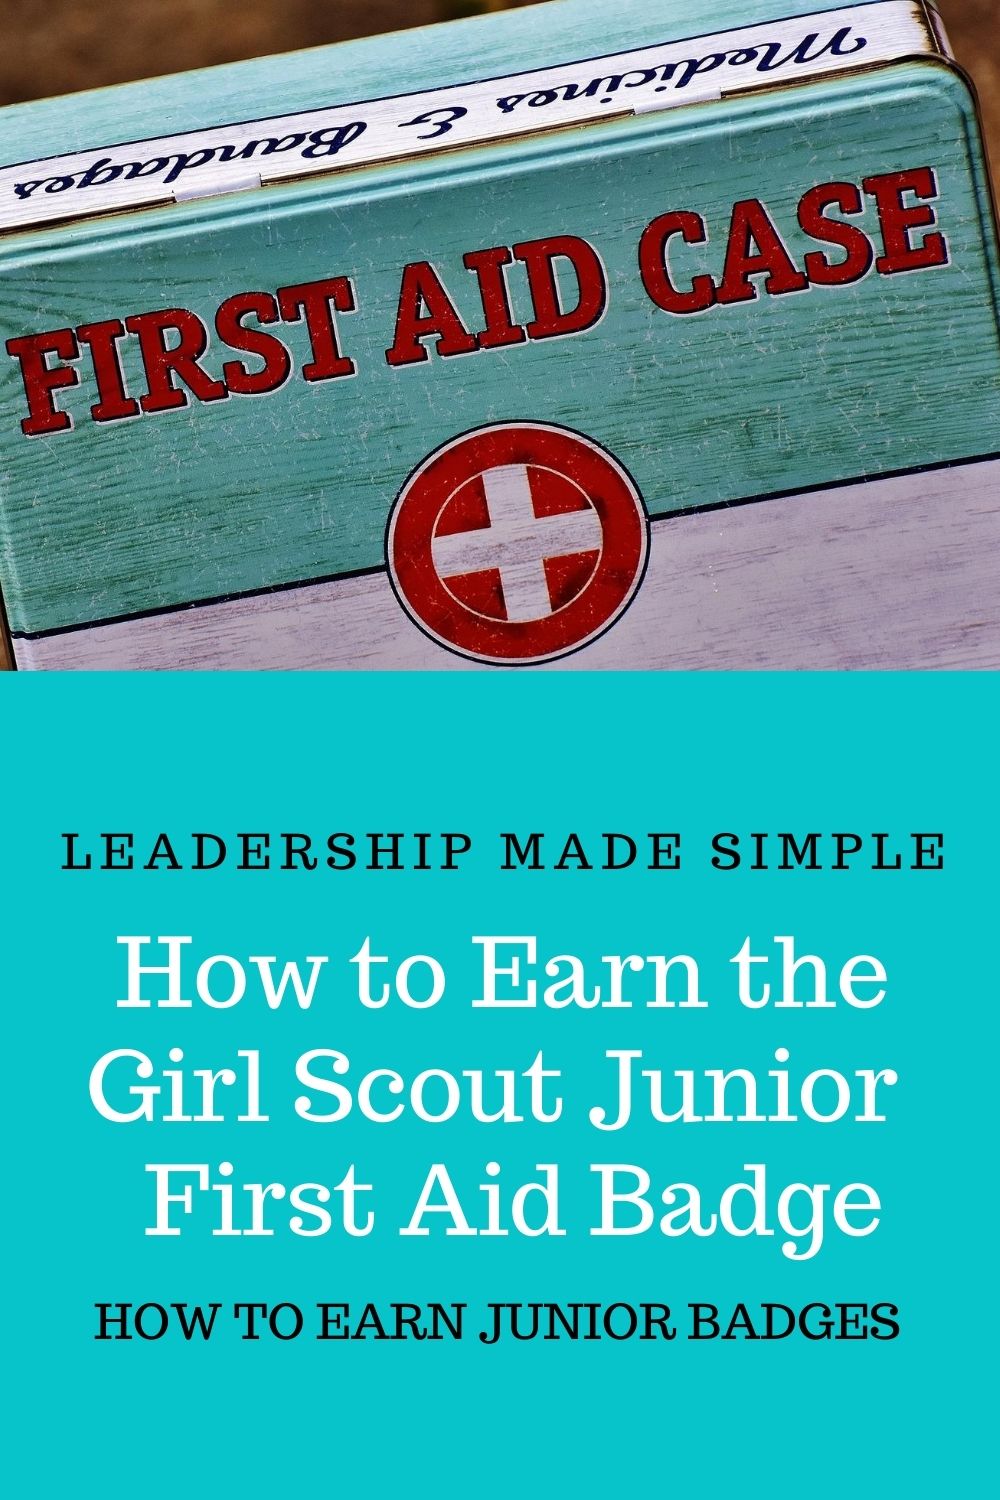 Junior First Aid Badge Requirements Pamphlet Girl Scout Shop | lupon.gov.ph